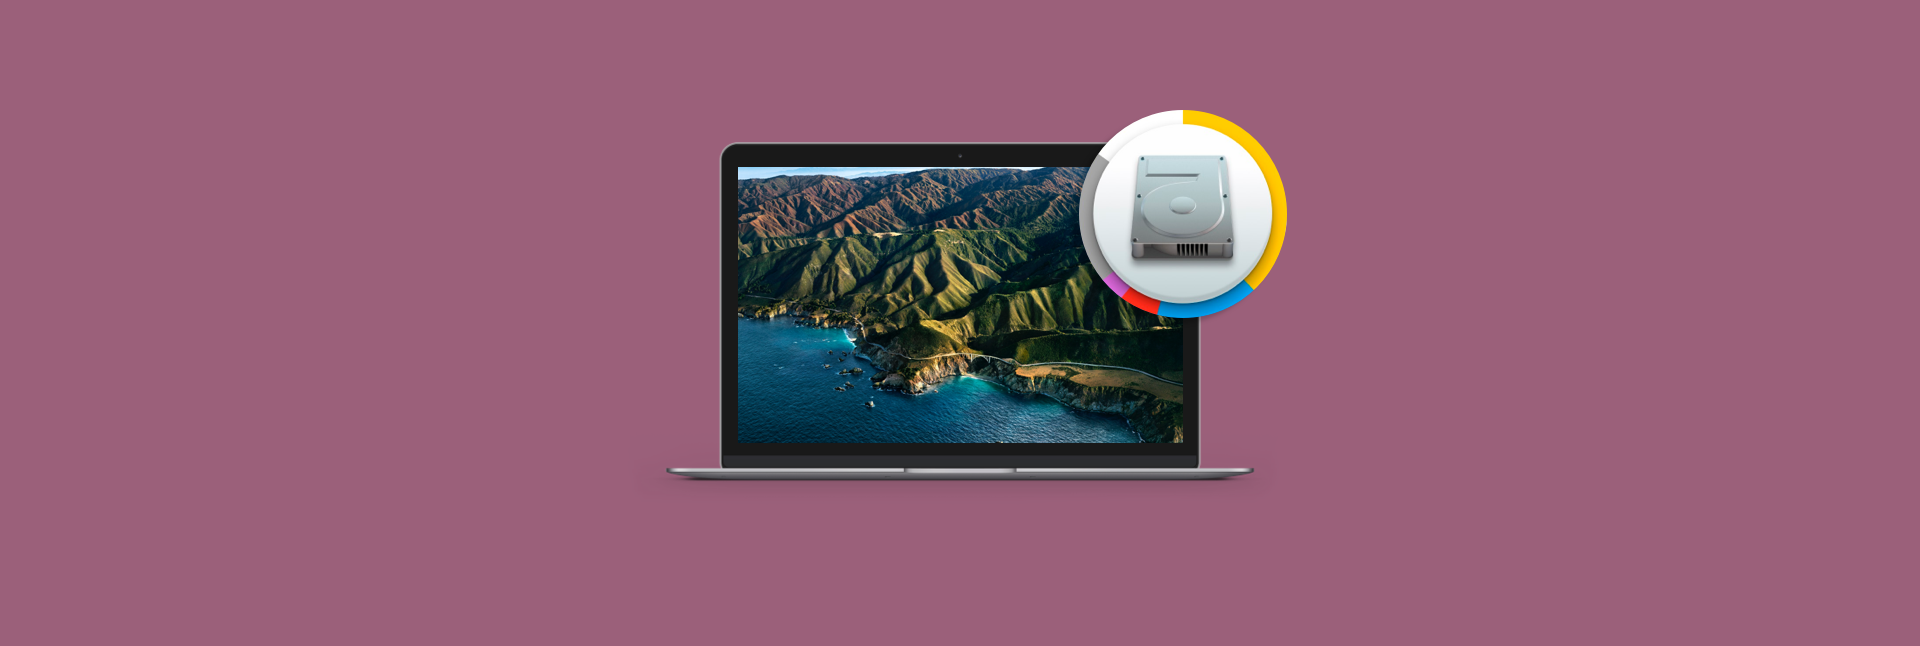 how to free space on hard drive on mac pro